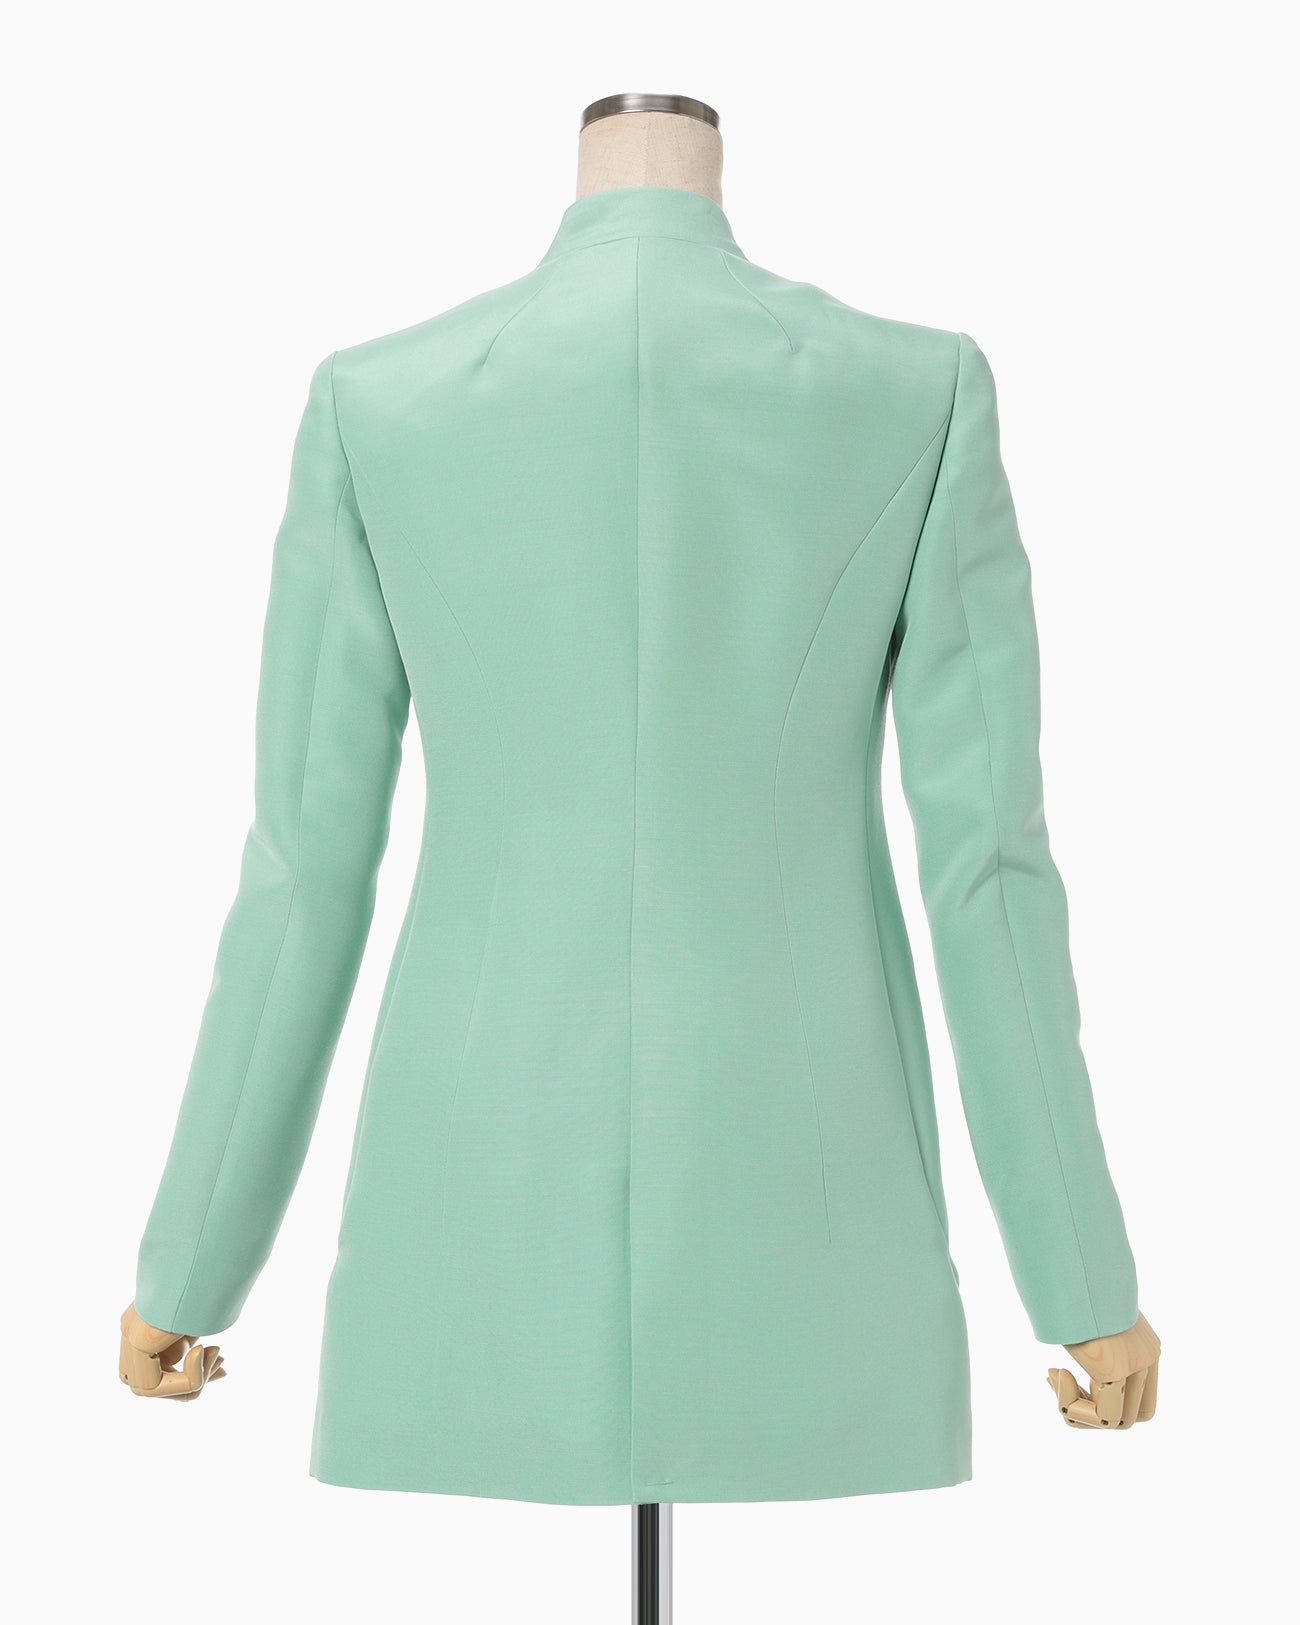 Silk Wool Double Cloth Stand Collar Jacket - mint green